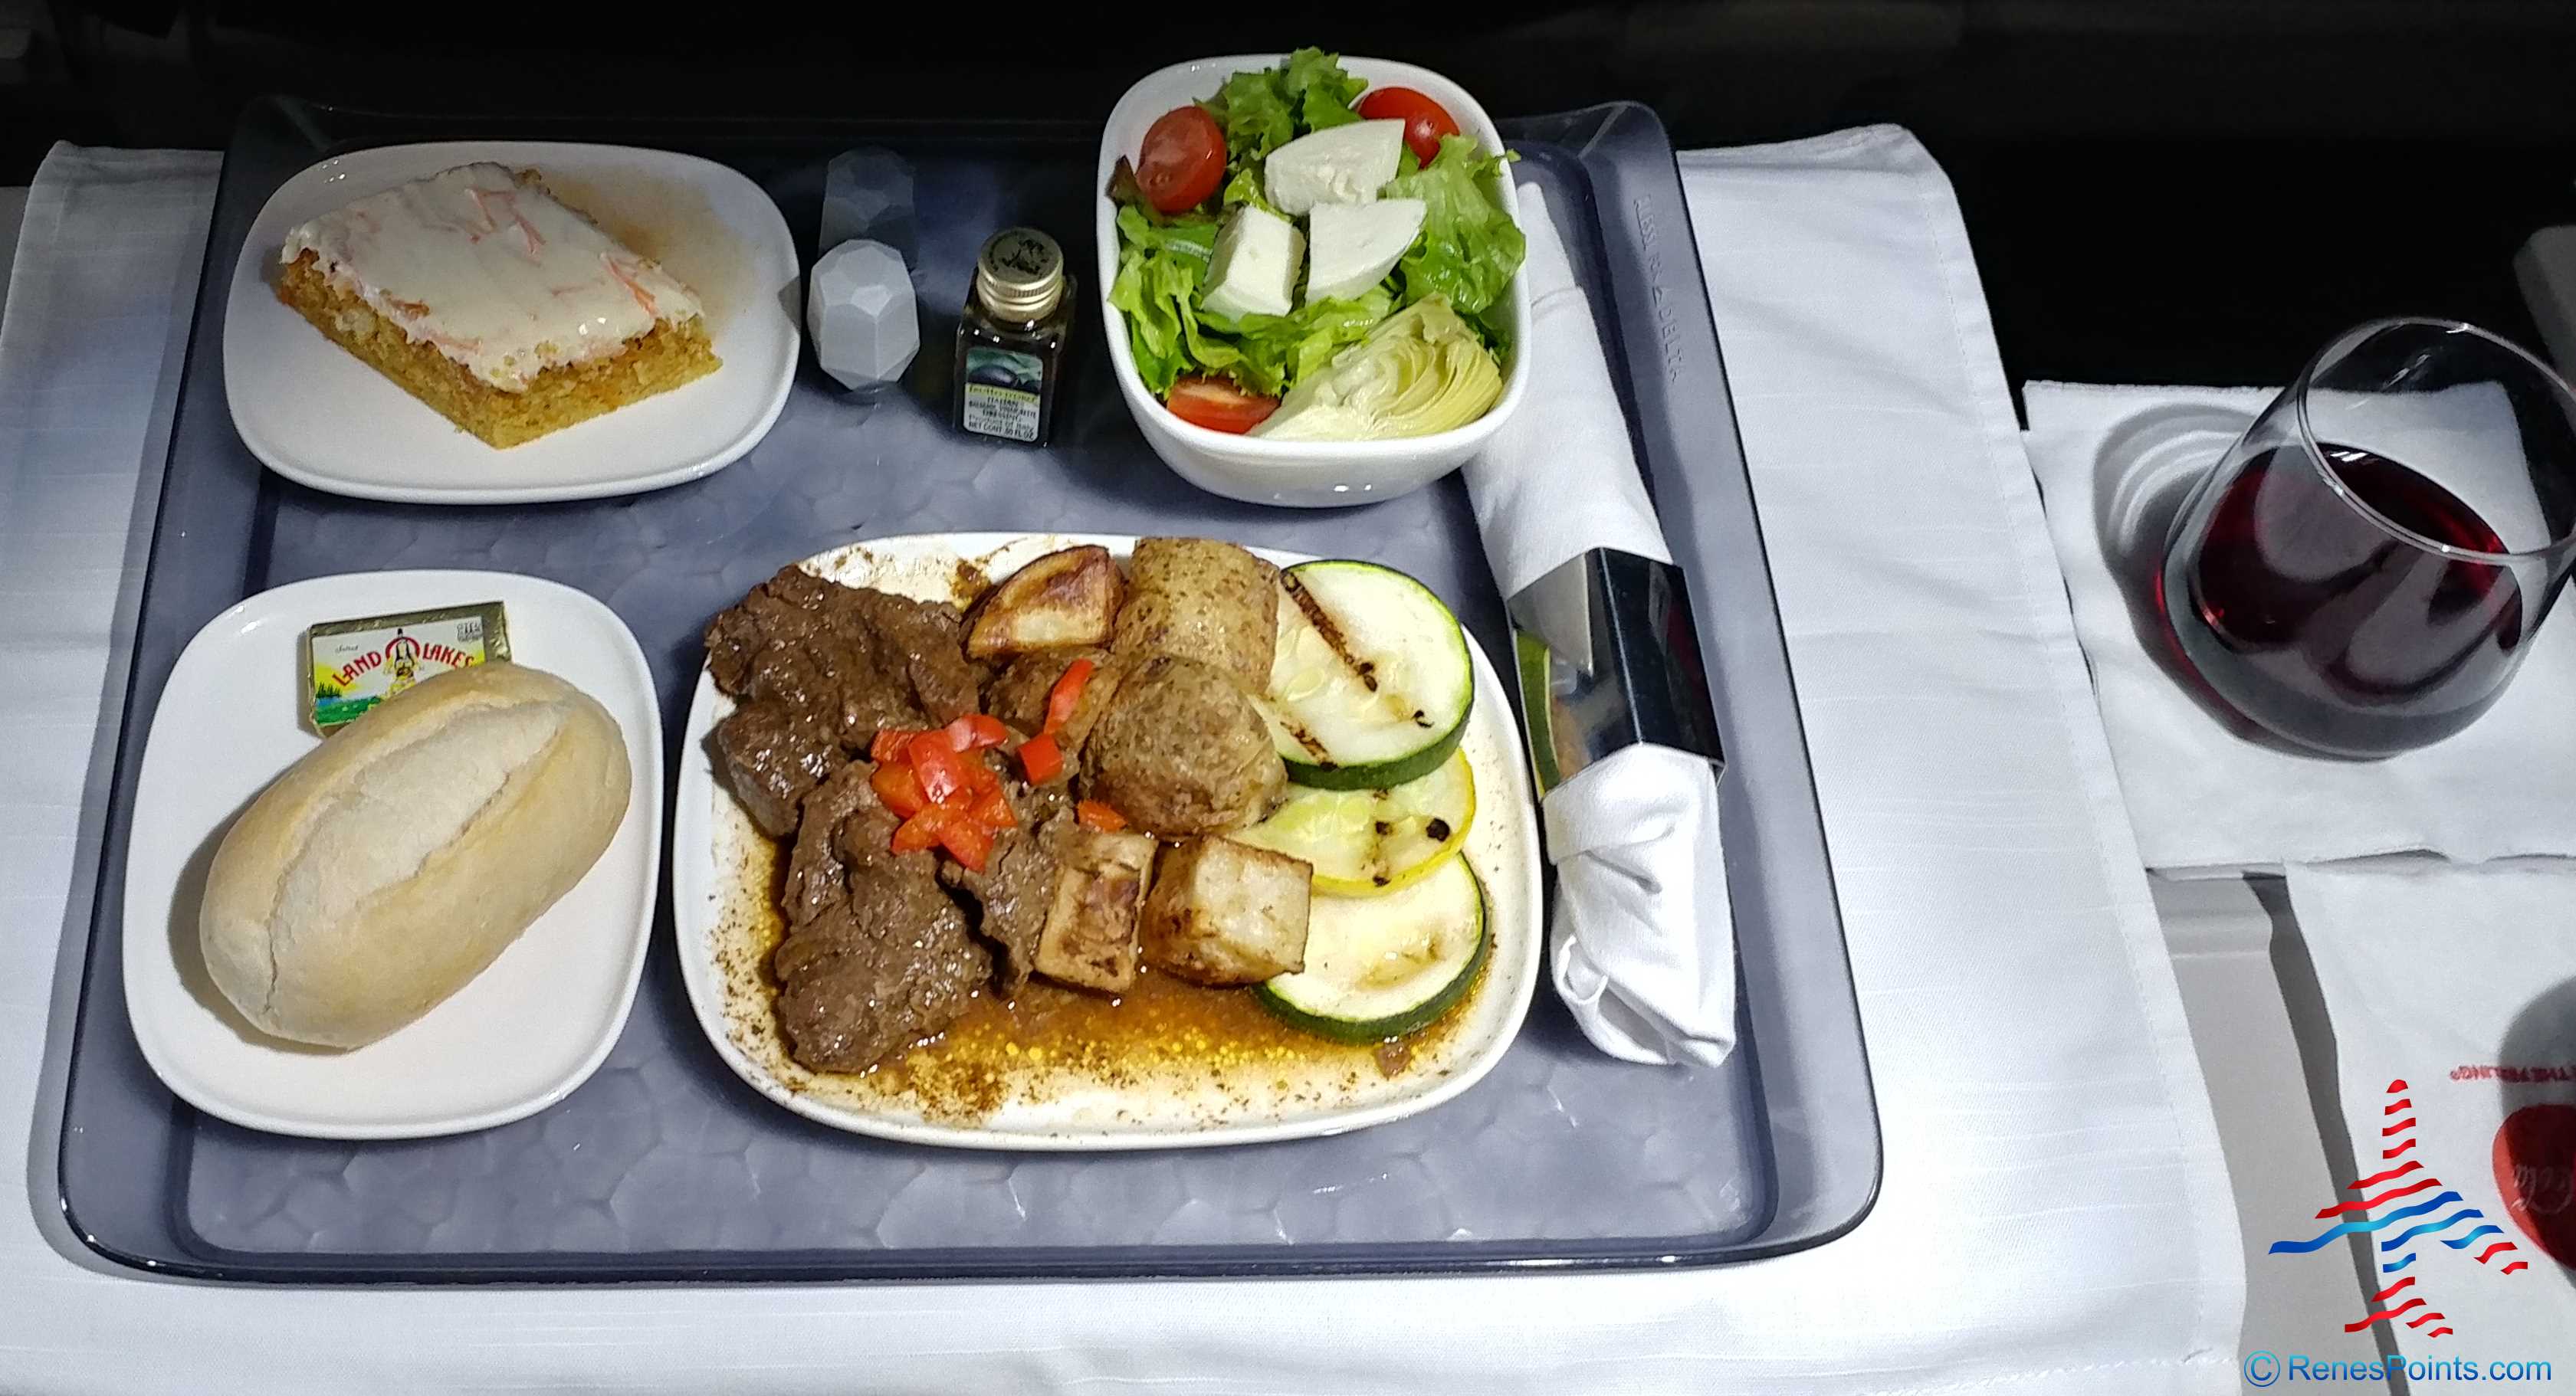 Delta first class beef something lunch stt to atl renespoints blog